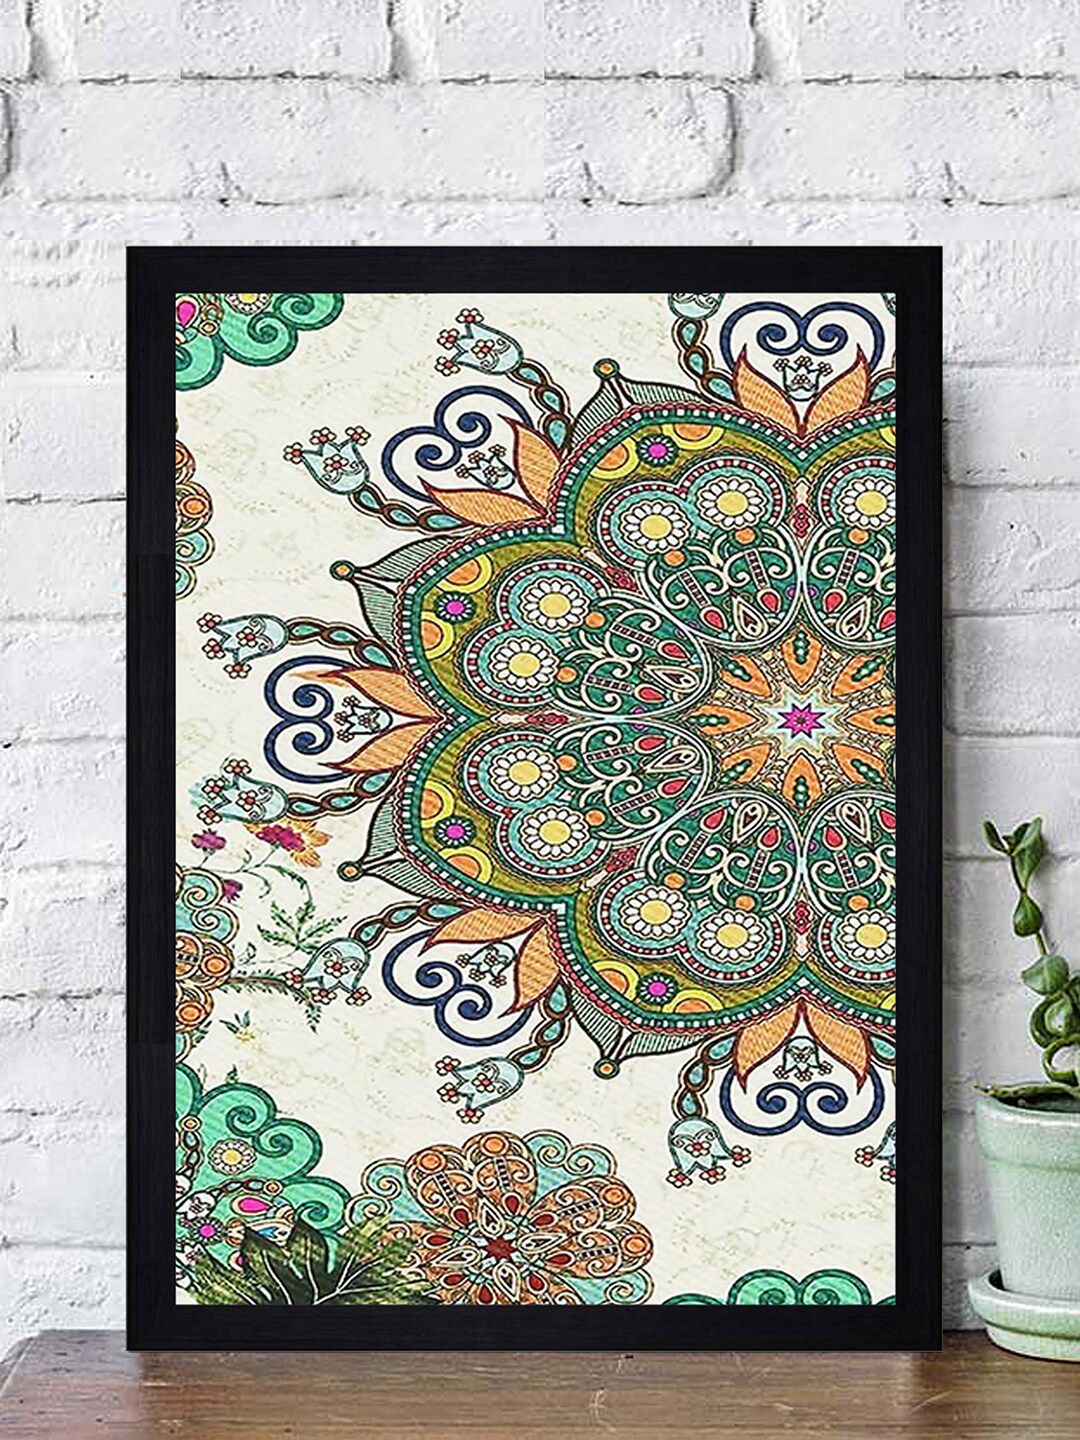 Gallery99 White & Green Abstract Mandala Textured Paper Framed Art Price in India